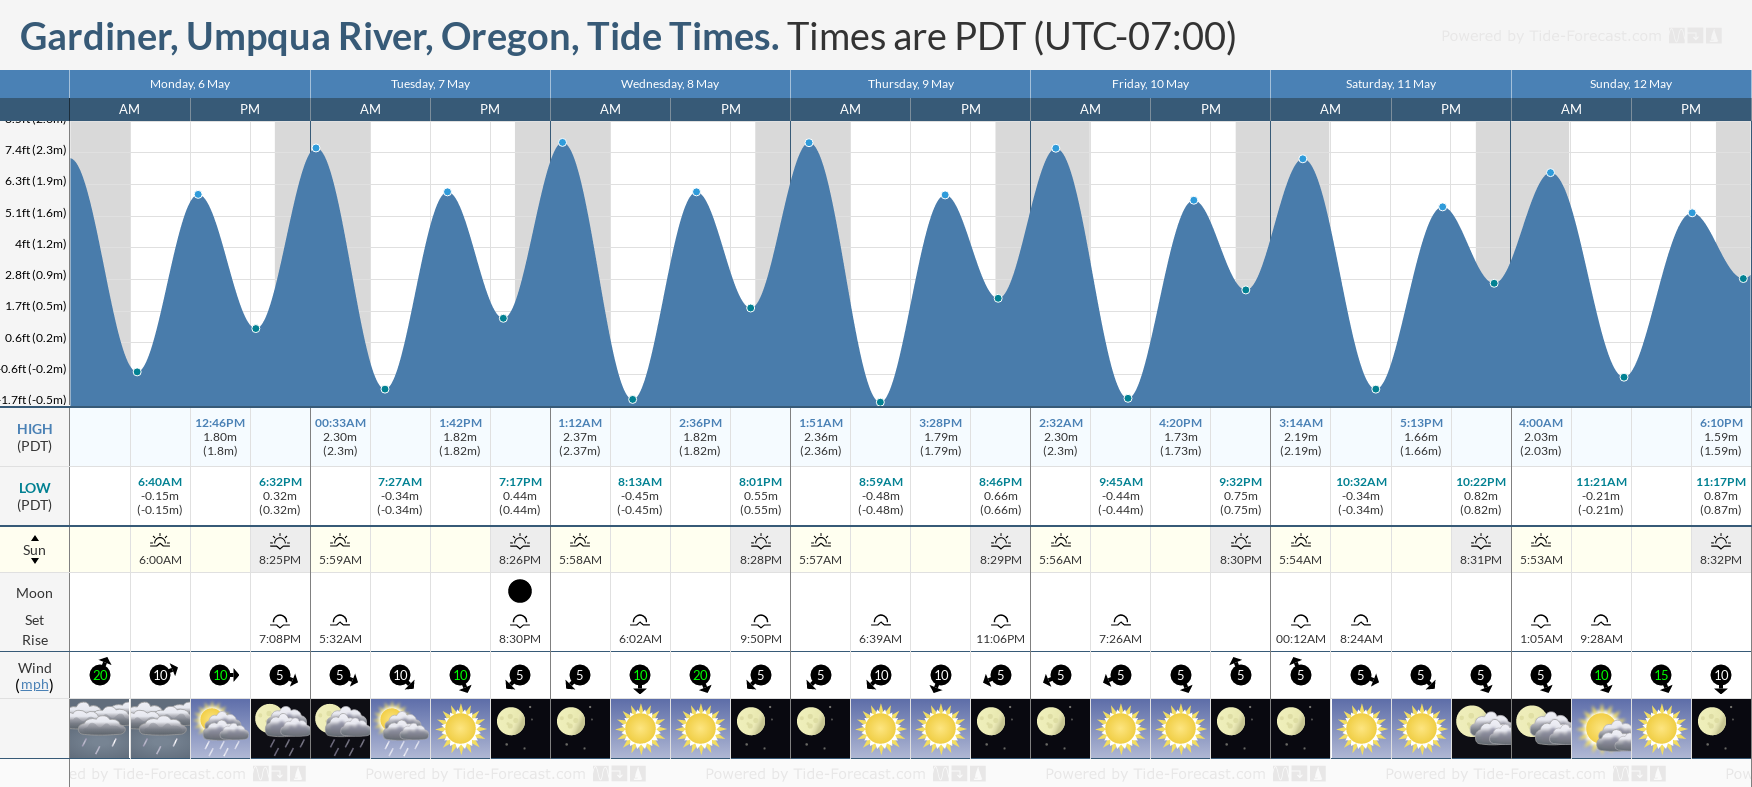 Gardiner, Umpqua River, Oregon Tide Chart including high and low tide tide times for the next 7 days